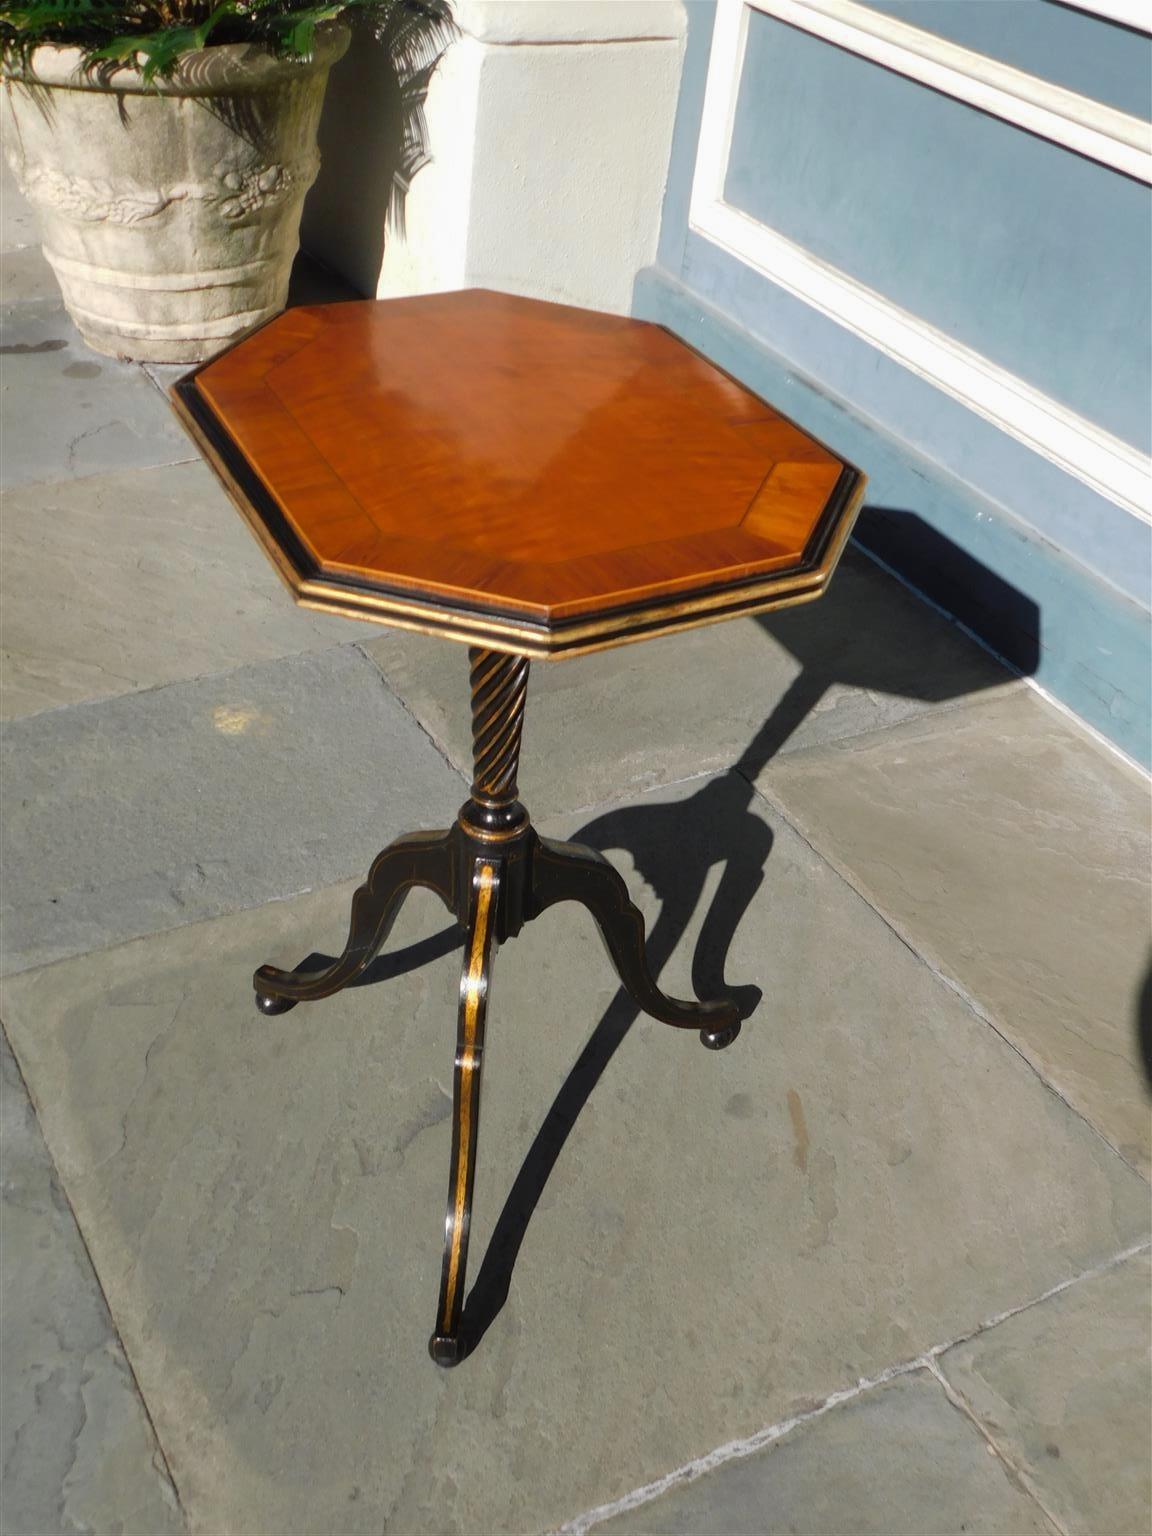 Late 18th Century English Regency Painted & Gilt Satinwood Inlaid Tripod Candle Stand, Circa 1790 For Sale